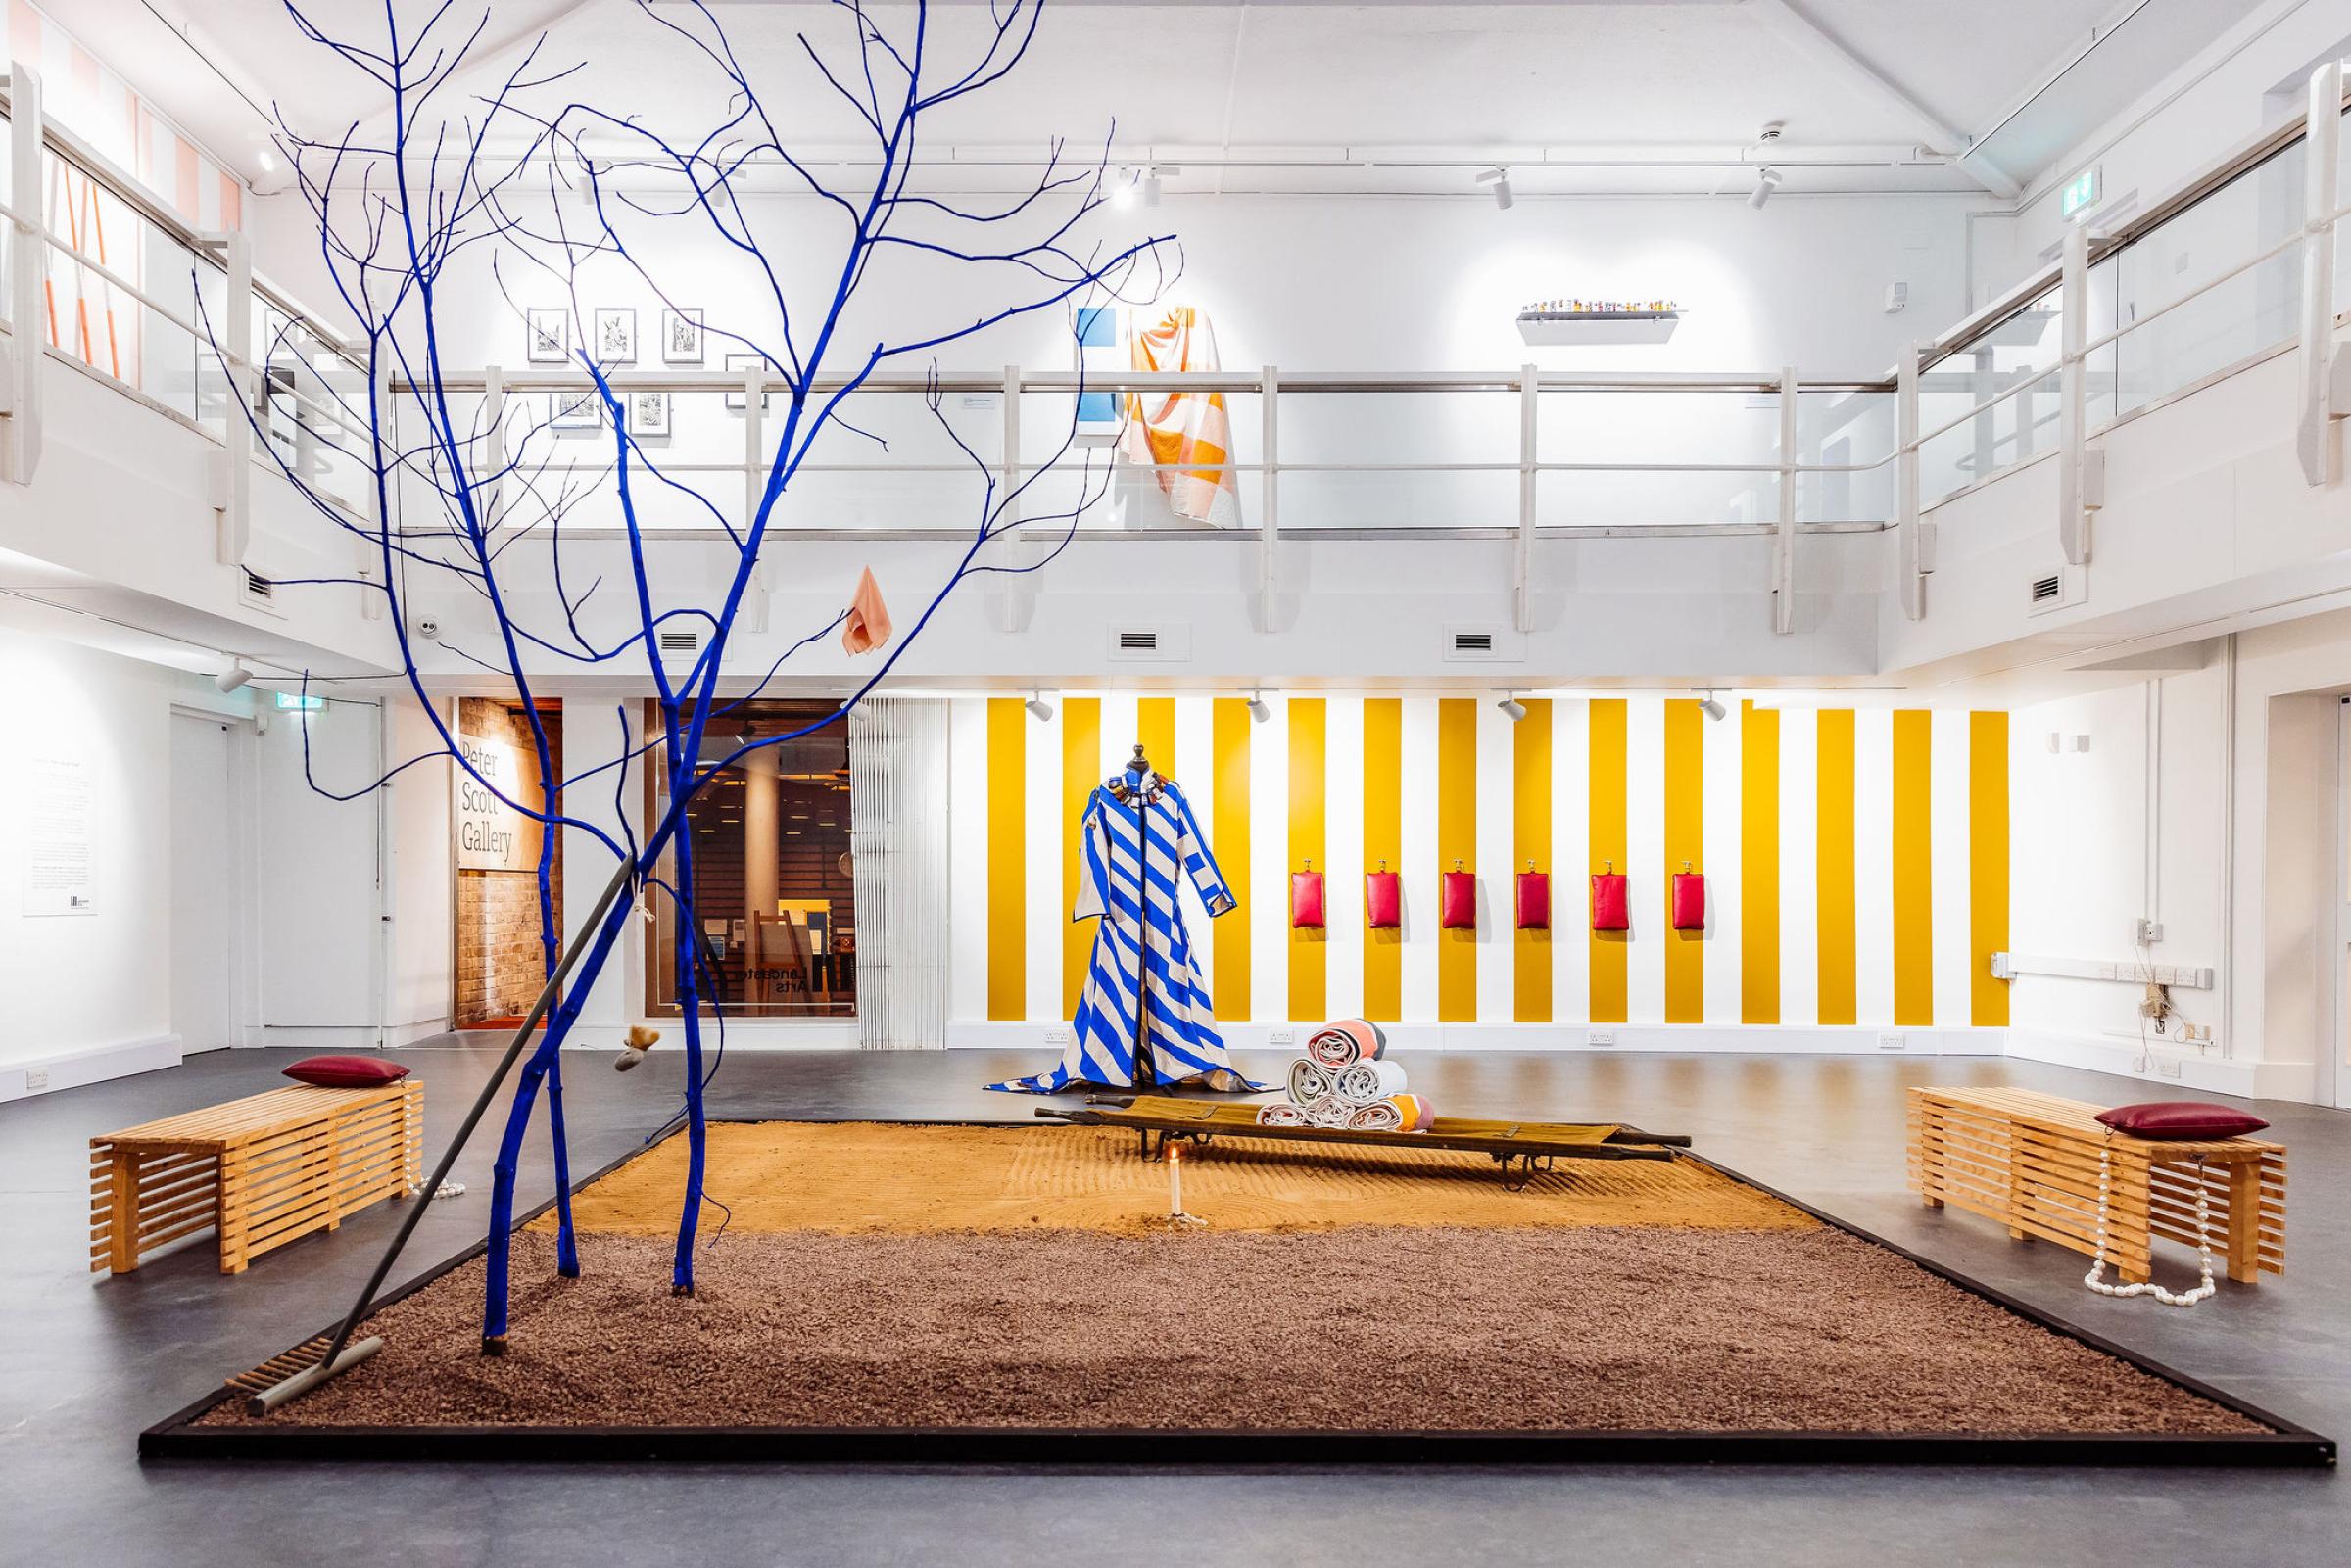 A zen garden of sand and gravel and a blue tree in an art gallery with one yellow and white striped wall